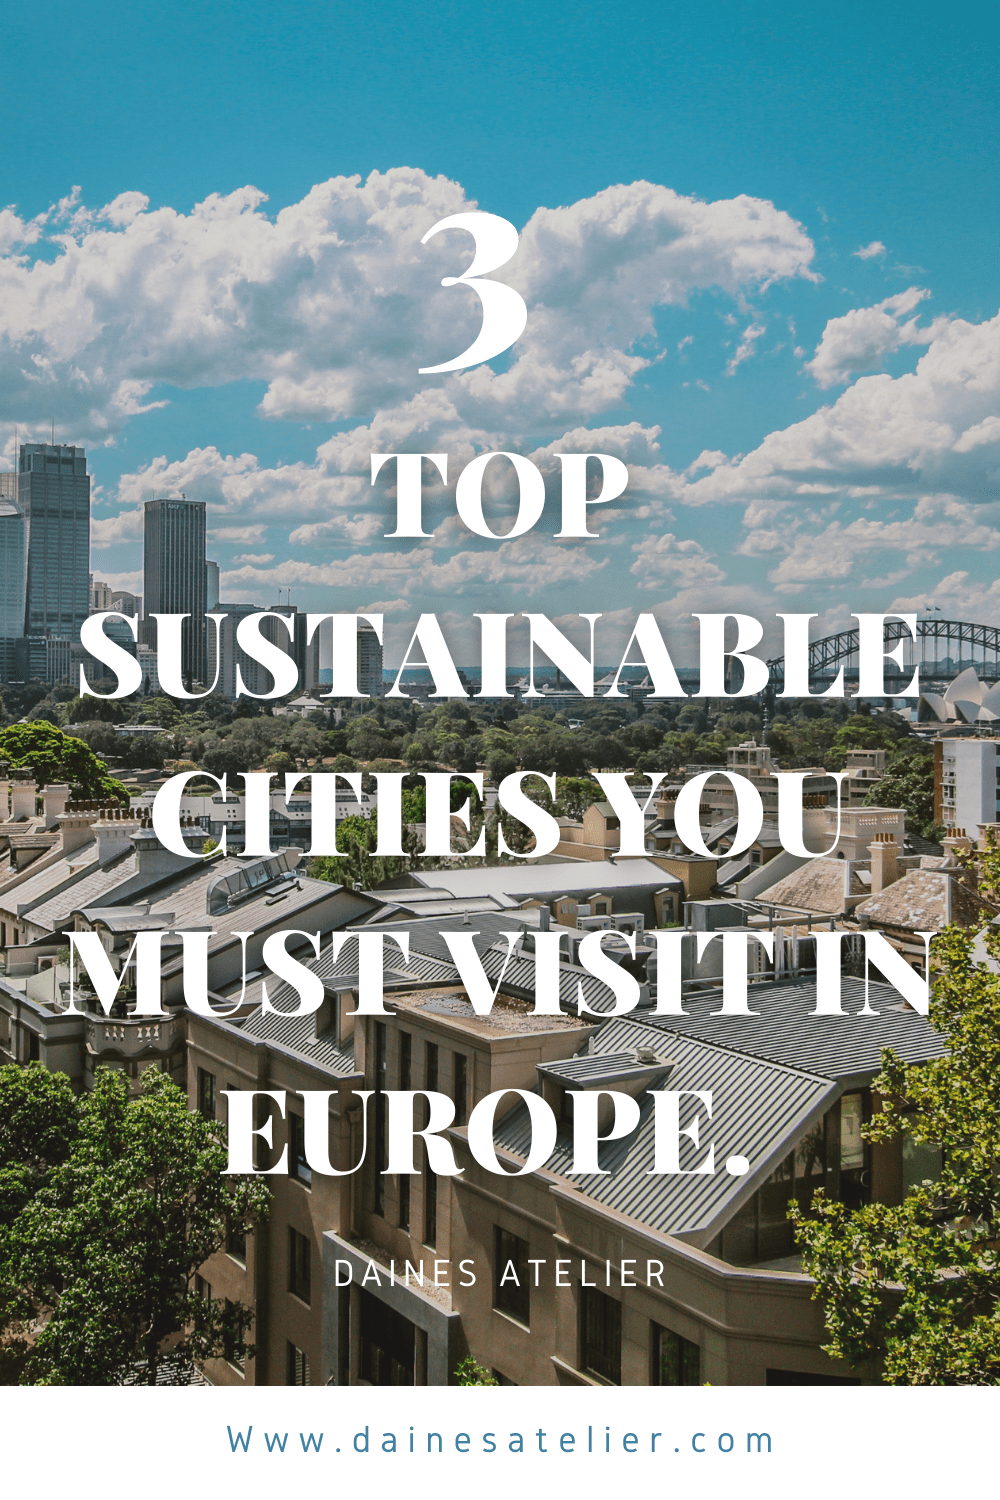 Top 3 Sustainable cities to visit in Europe